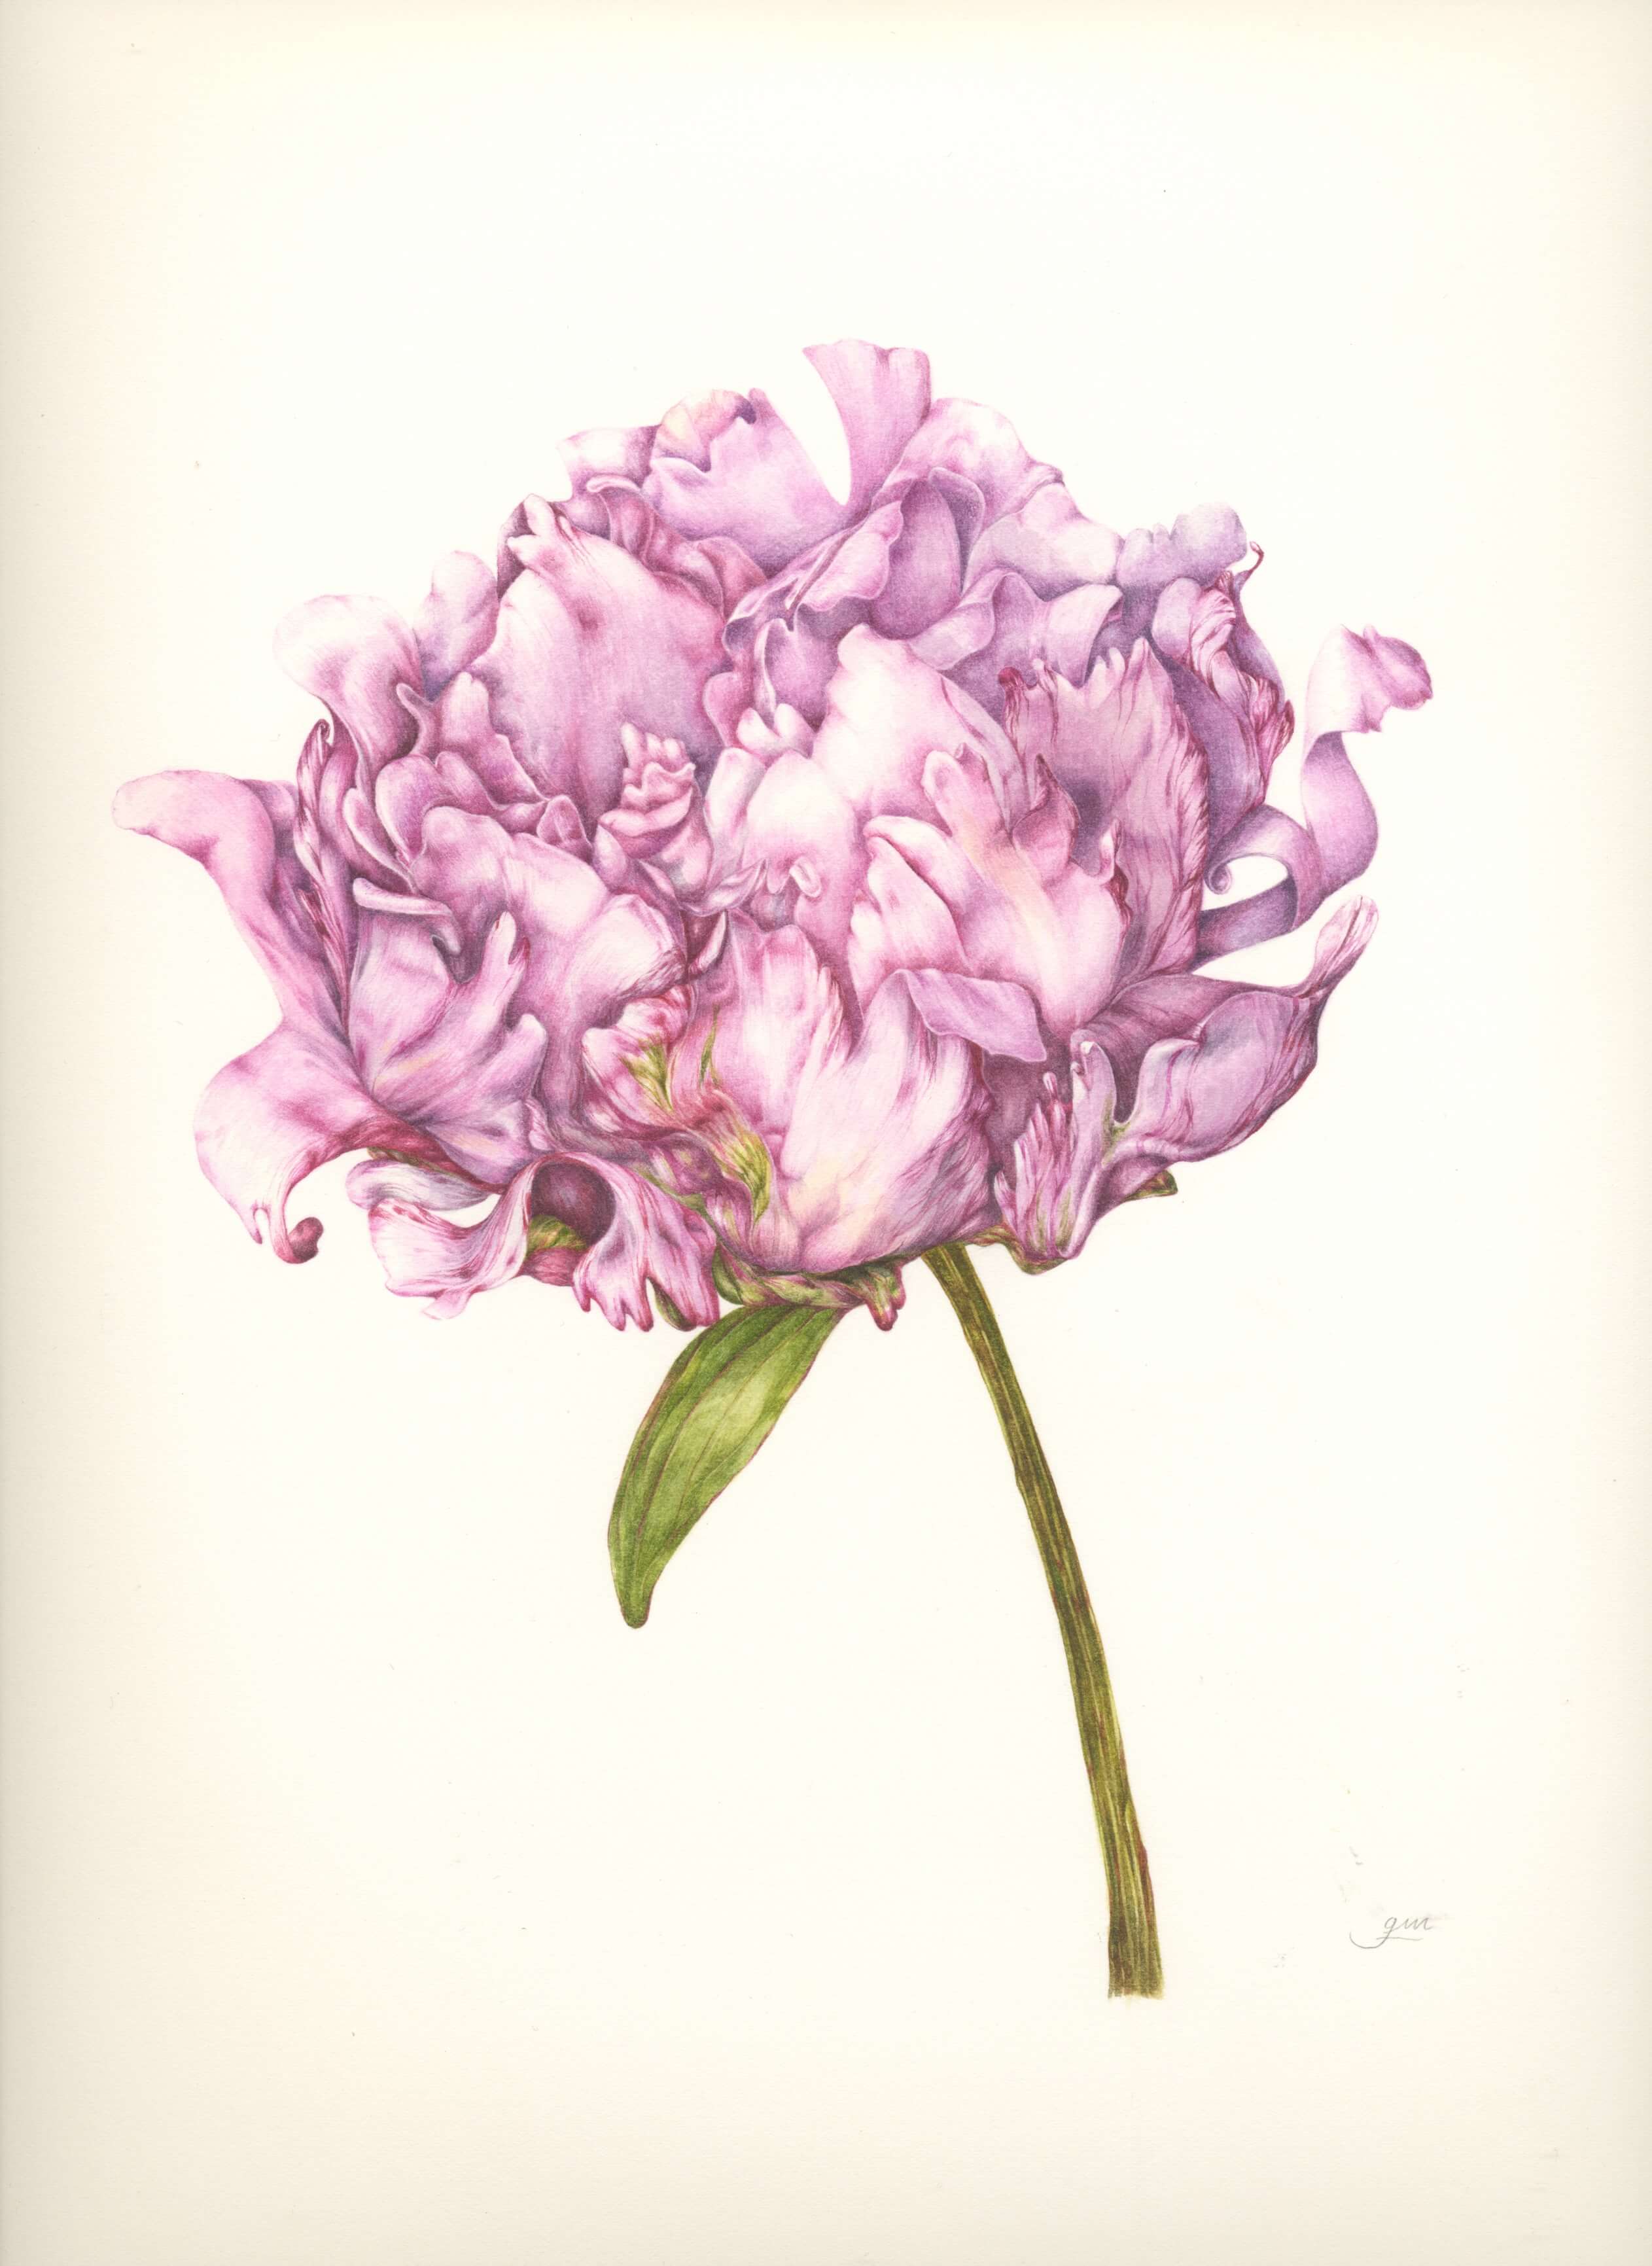 Pink peonies in bloom, botanical illustration by artist and tutor Giacomina Ferrillo.